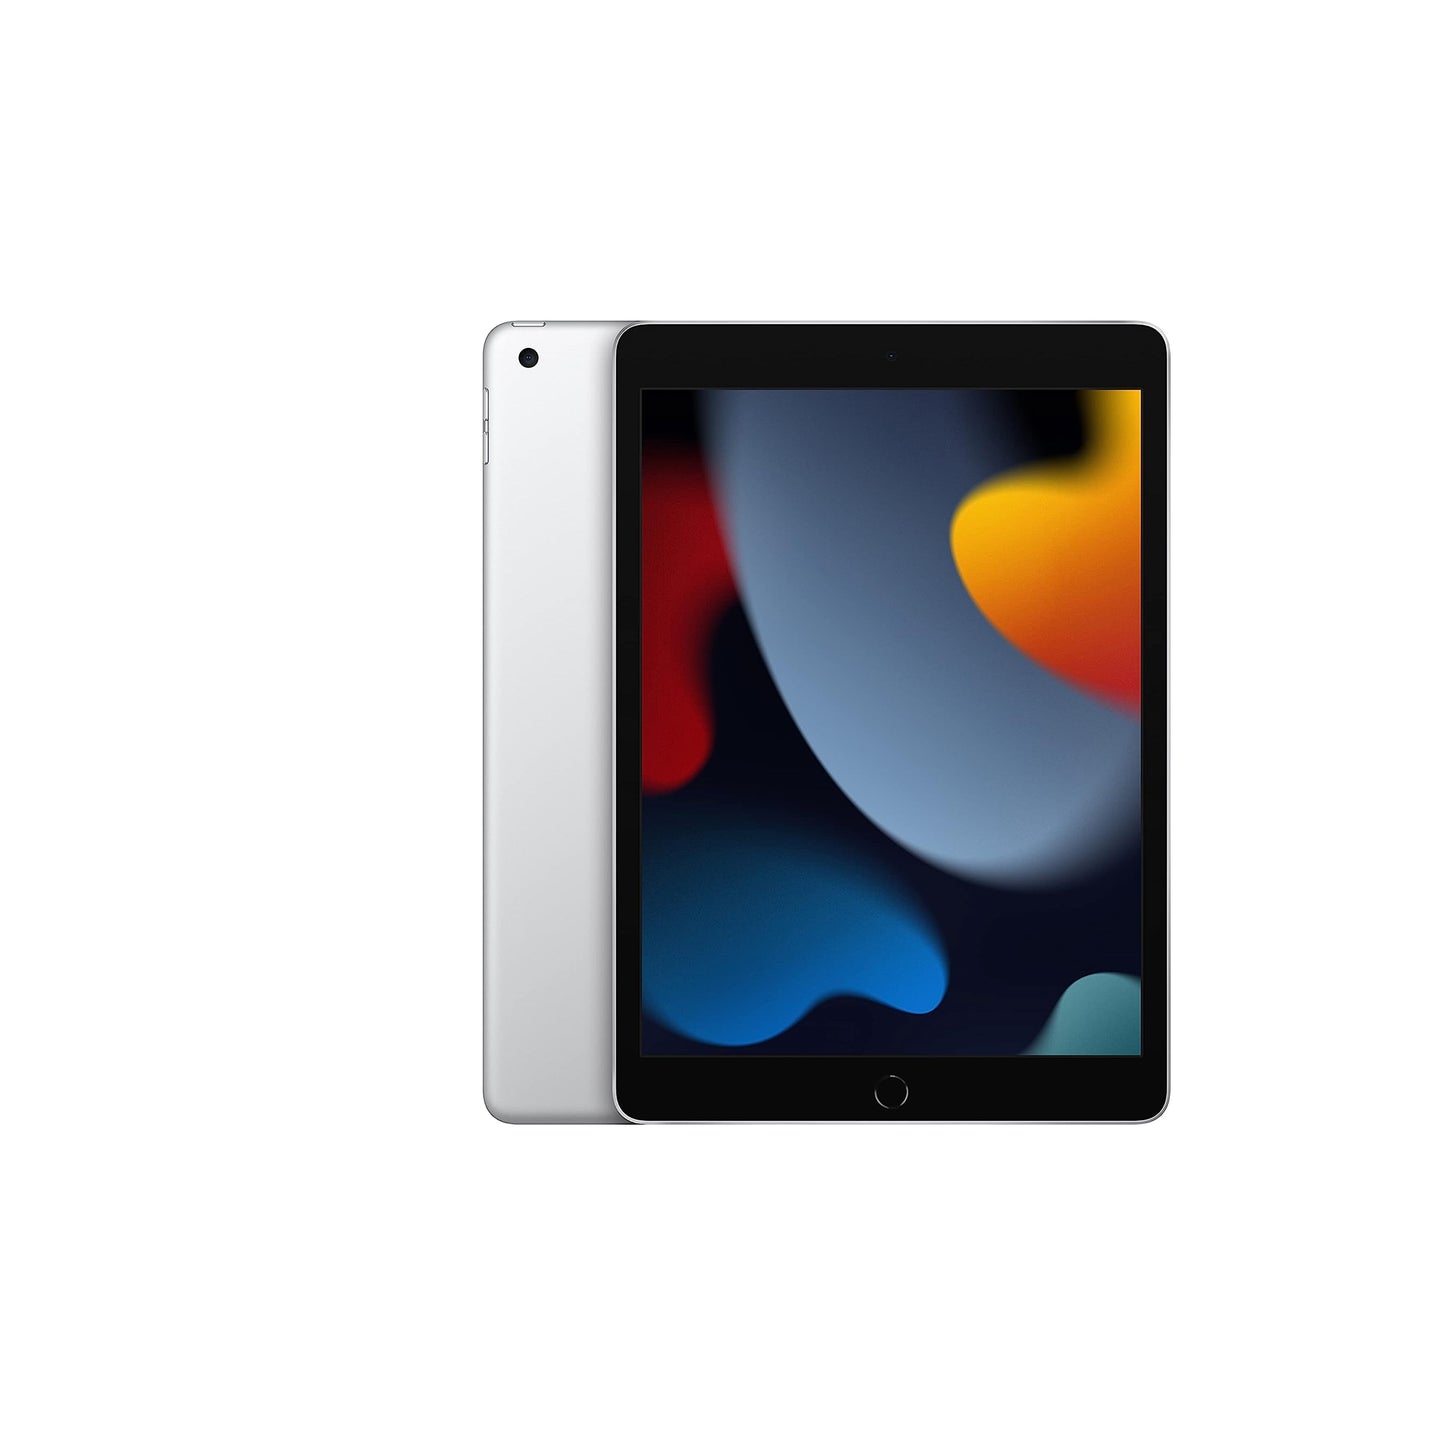 Apple iPad (9th Generation): with A13 Bionic chip, 10.2-inch Retina Display, 64GB, Wi-Fi + 4G LTE Cellular, 12MP front/8MP Back Camera, Touch ID, All-Day Battery Life – Space Gray